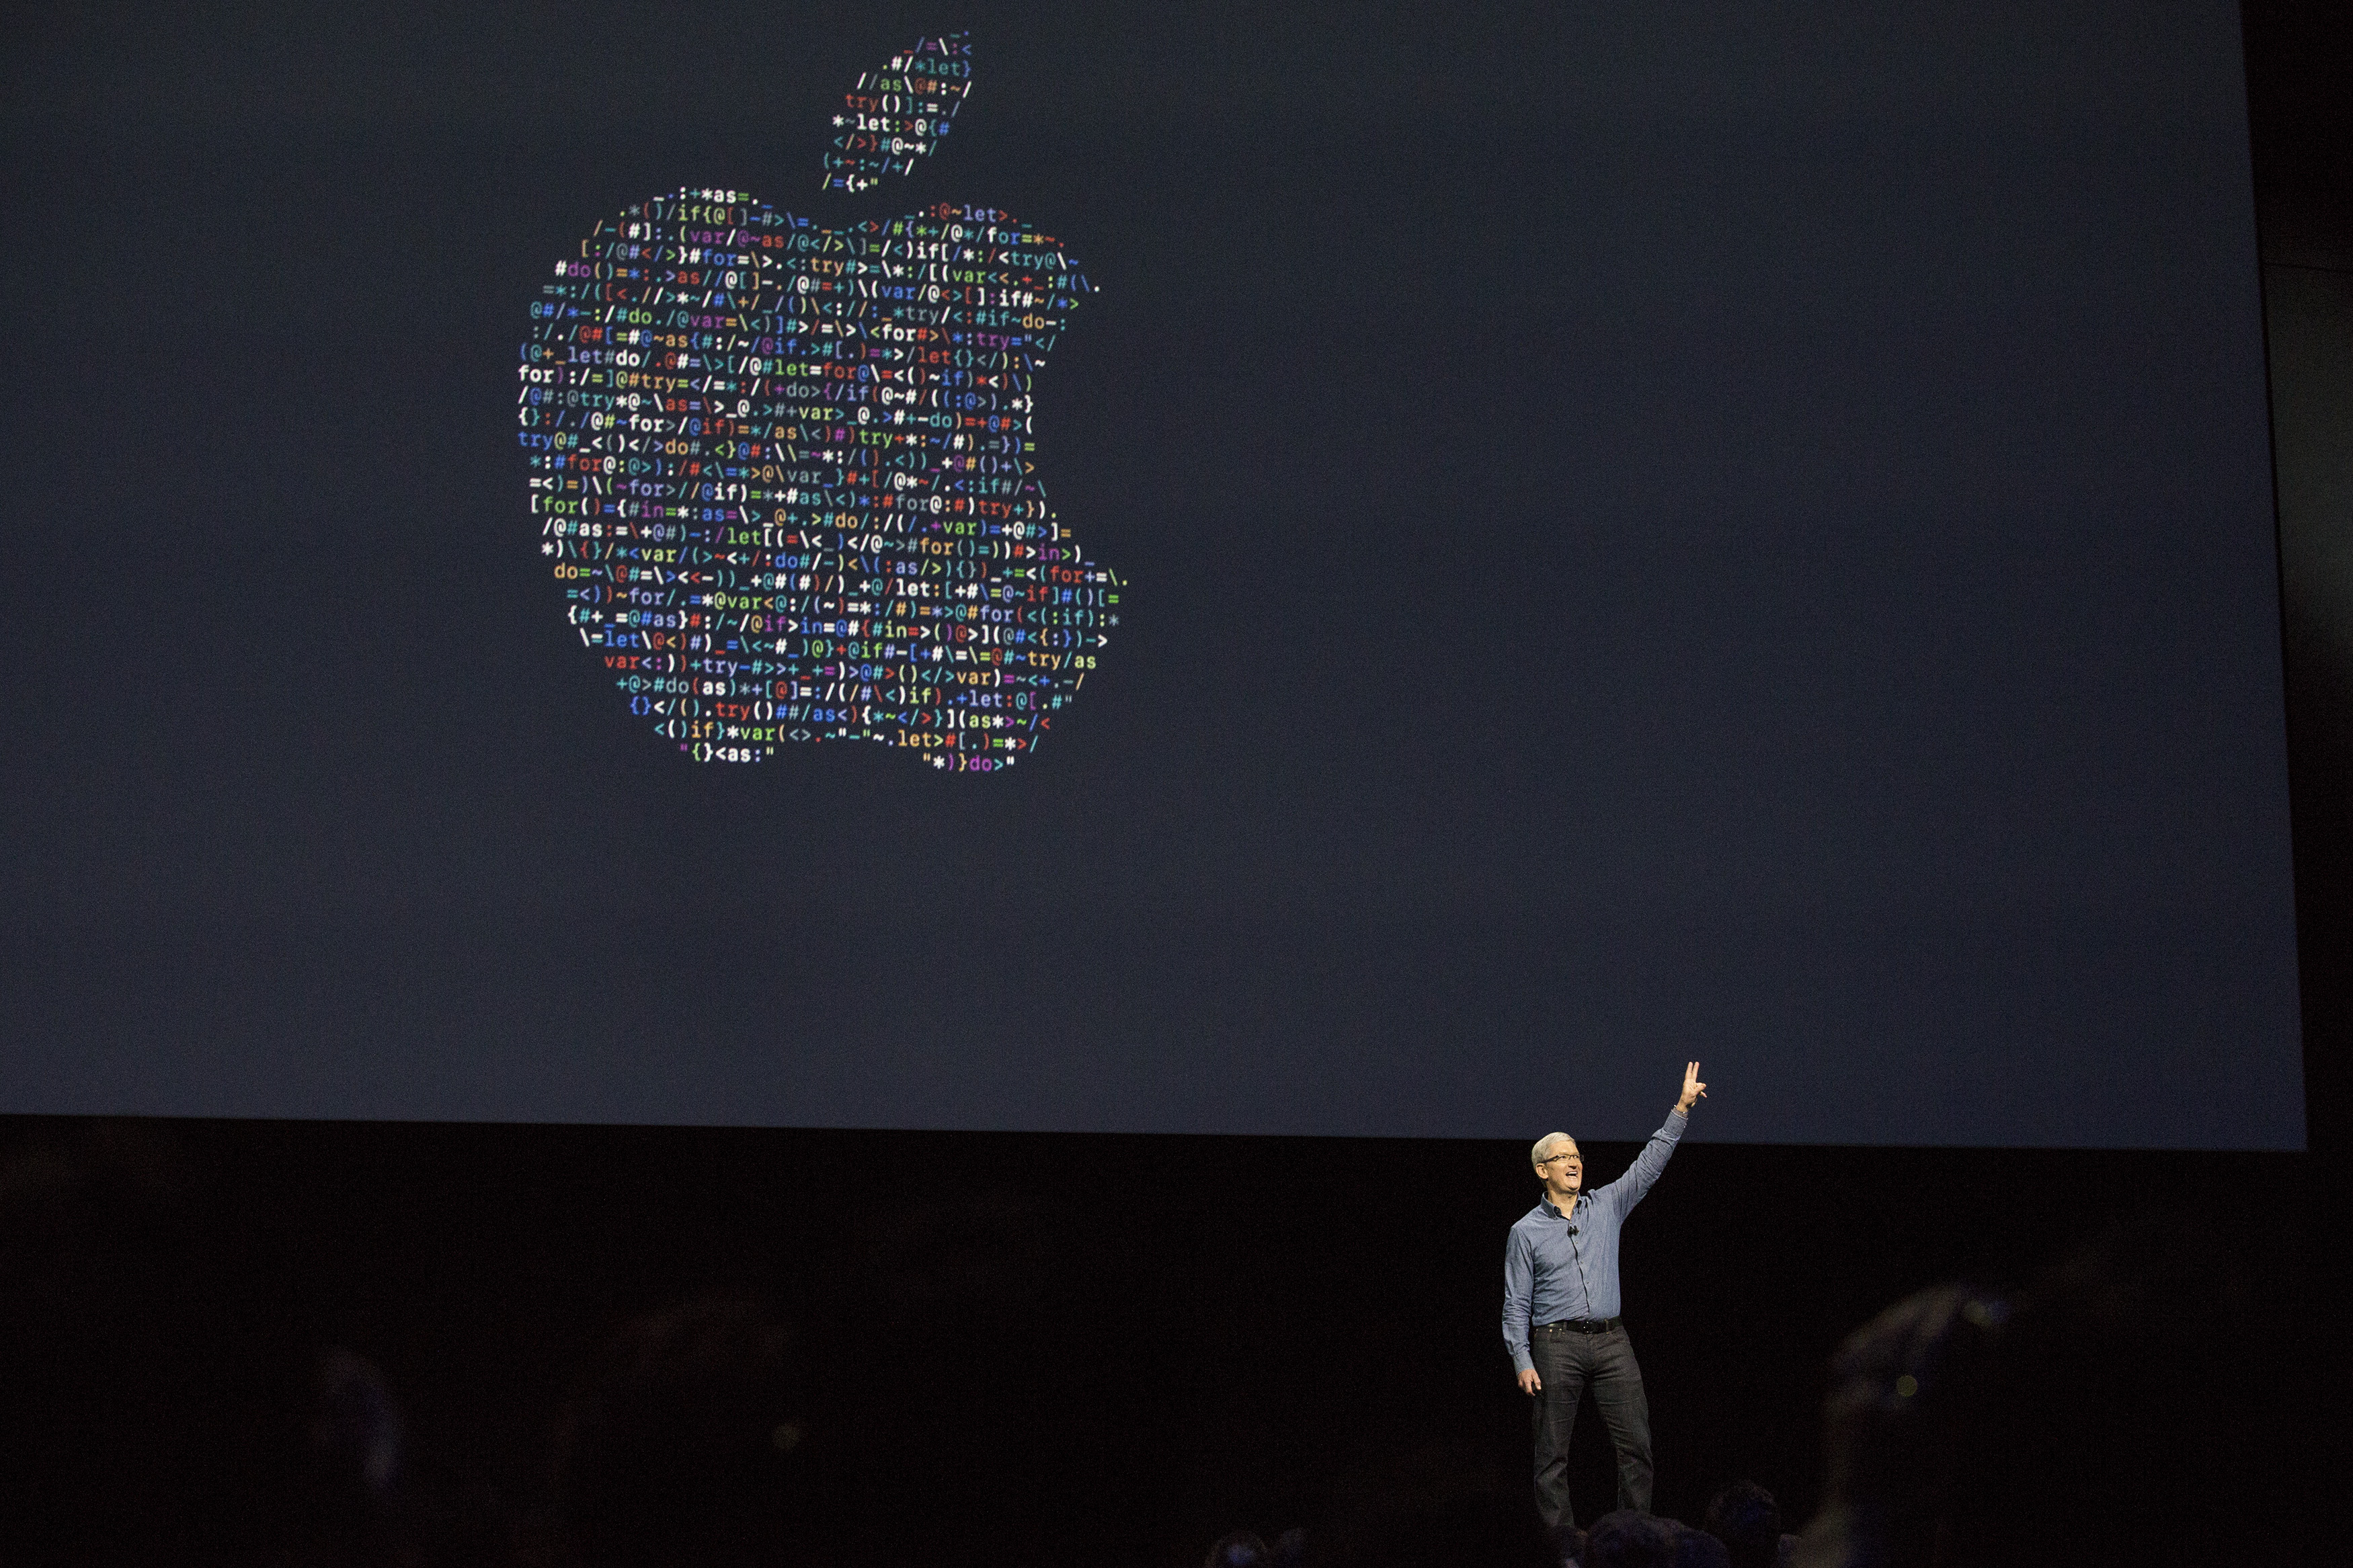 Apple CEO Tim Cook waves good bye after speaking at an Apple event at the Worldwide Developer's Conference on June 13, 2016 in San Francisco, California. (Andrew Burton—Getty Images)